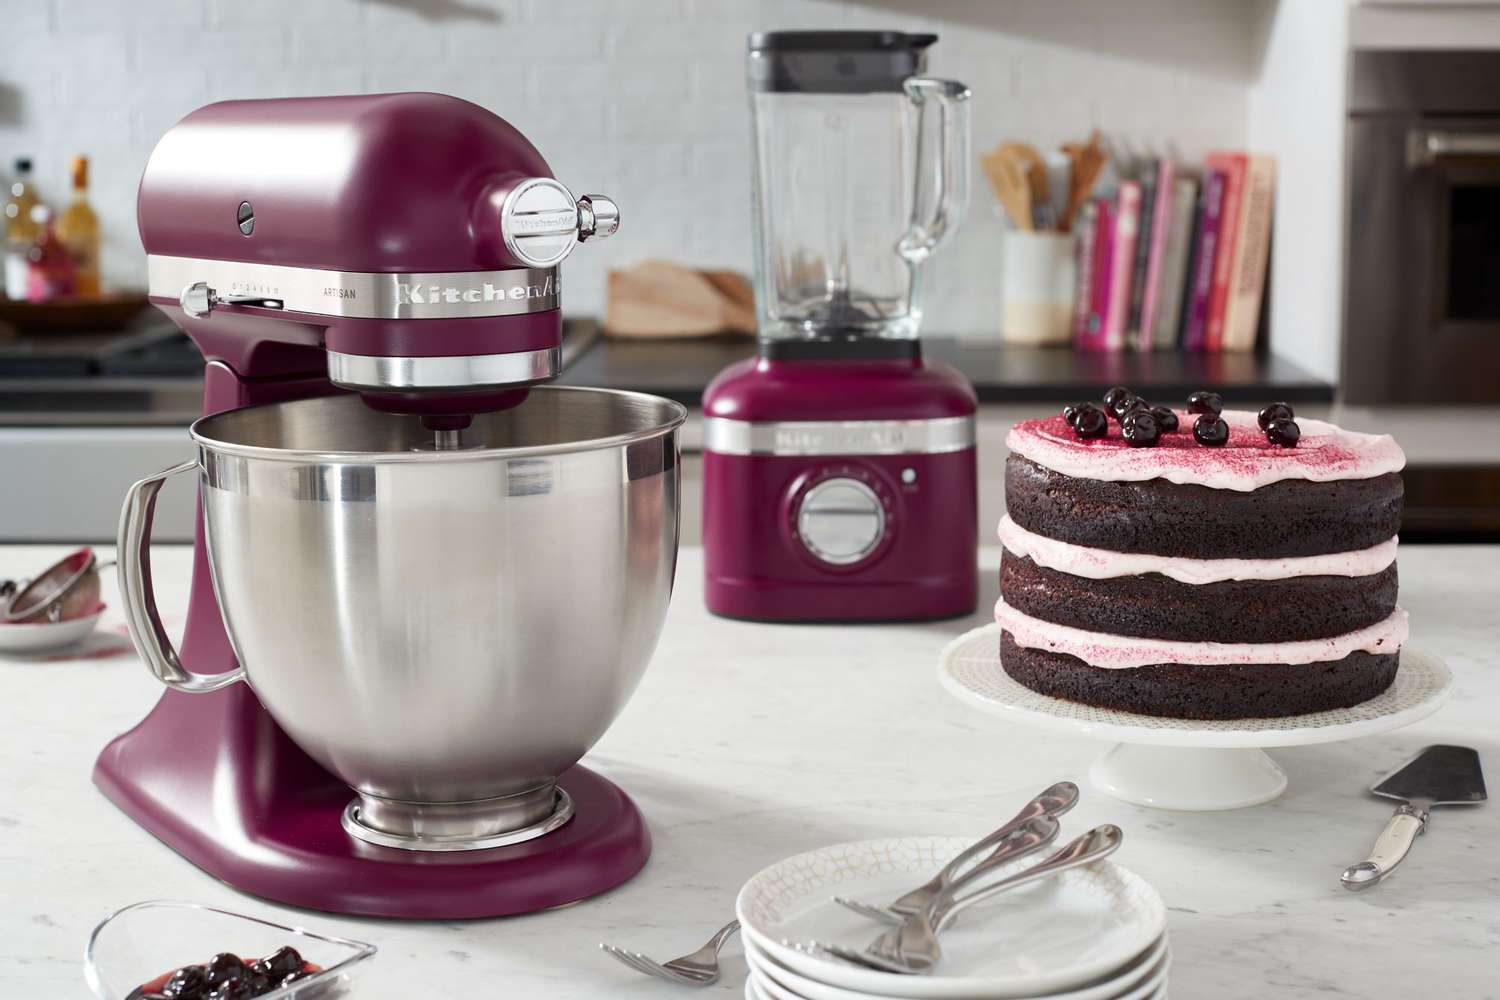 kitcehnaid stand mixer and blender in beetroot color option